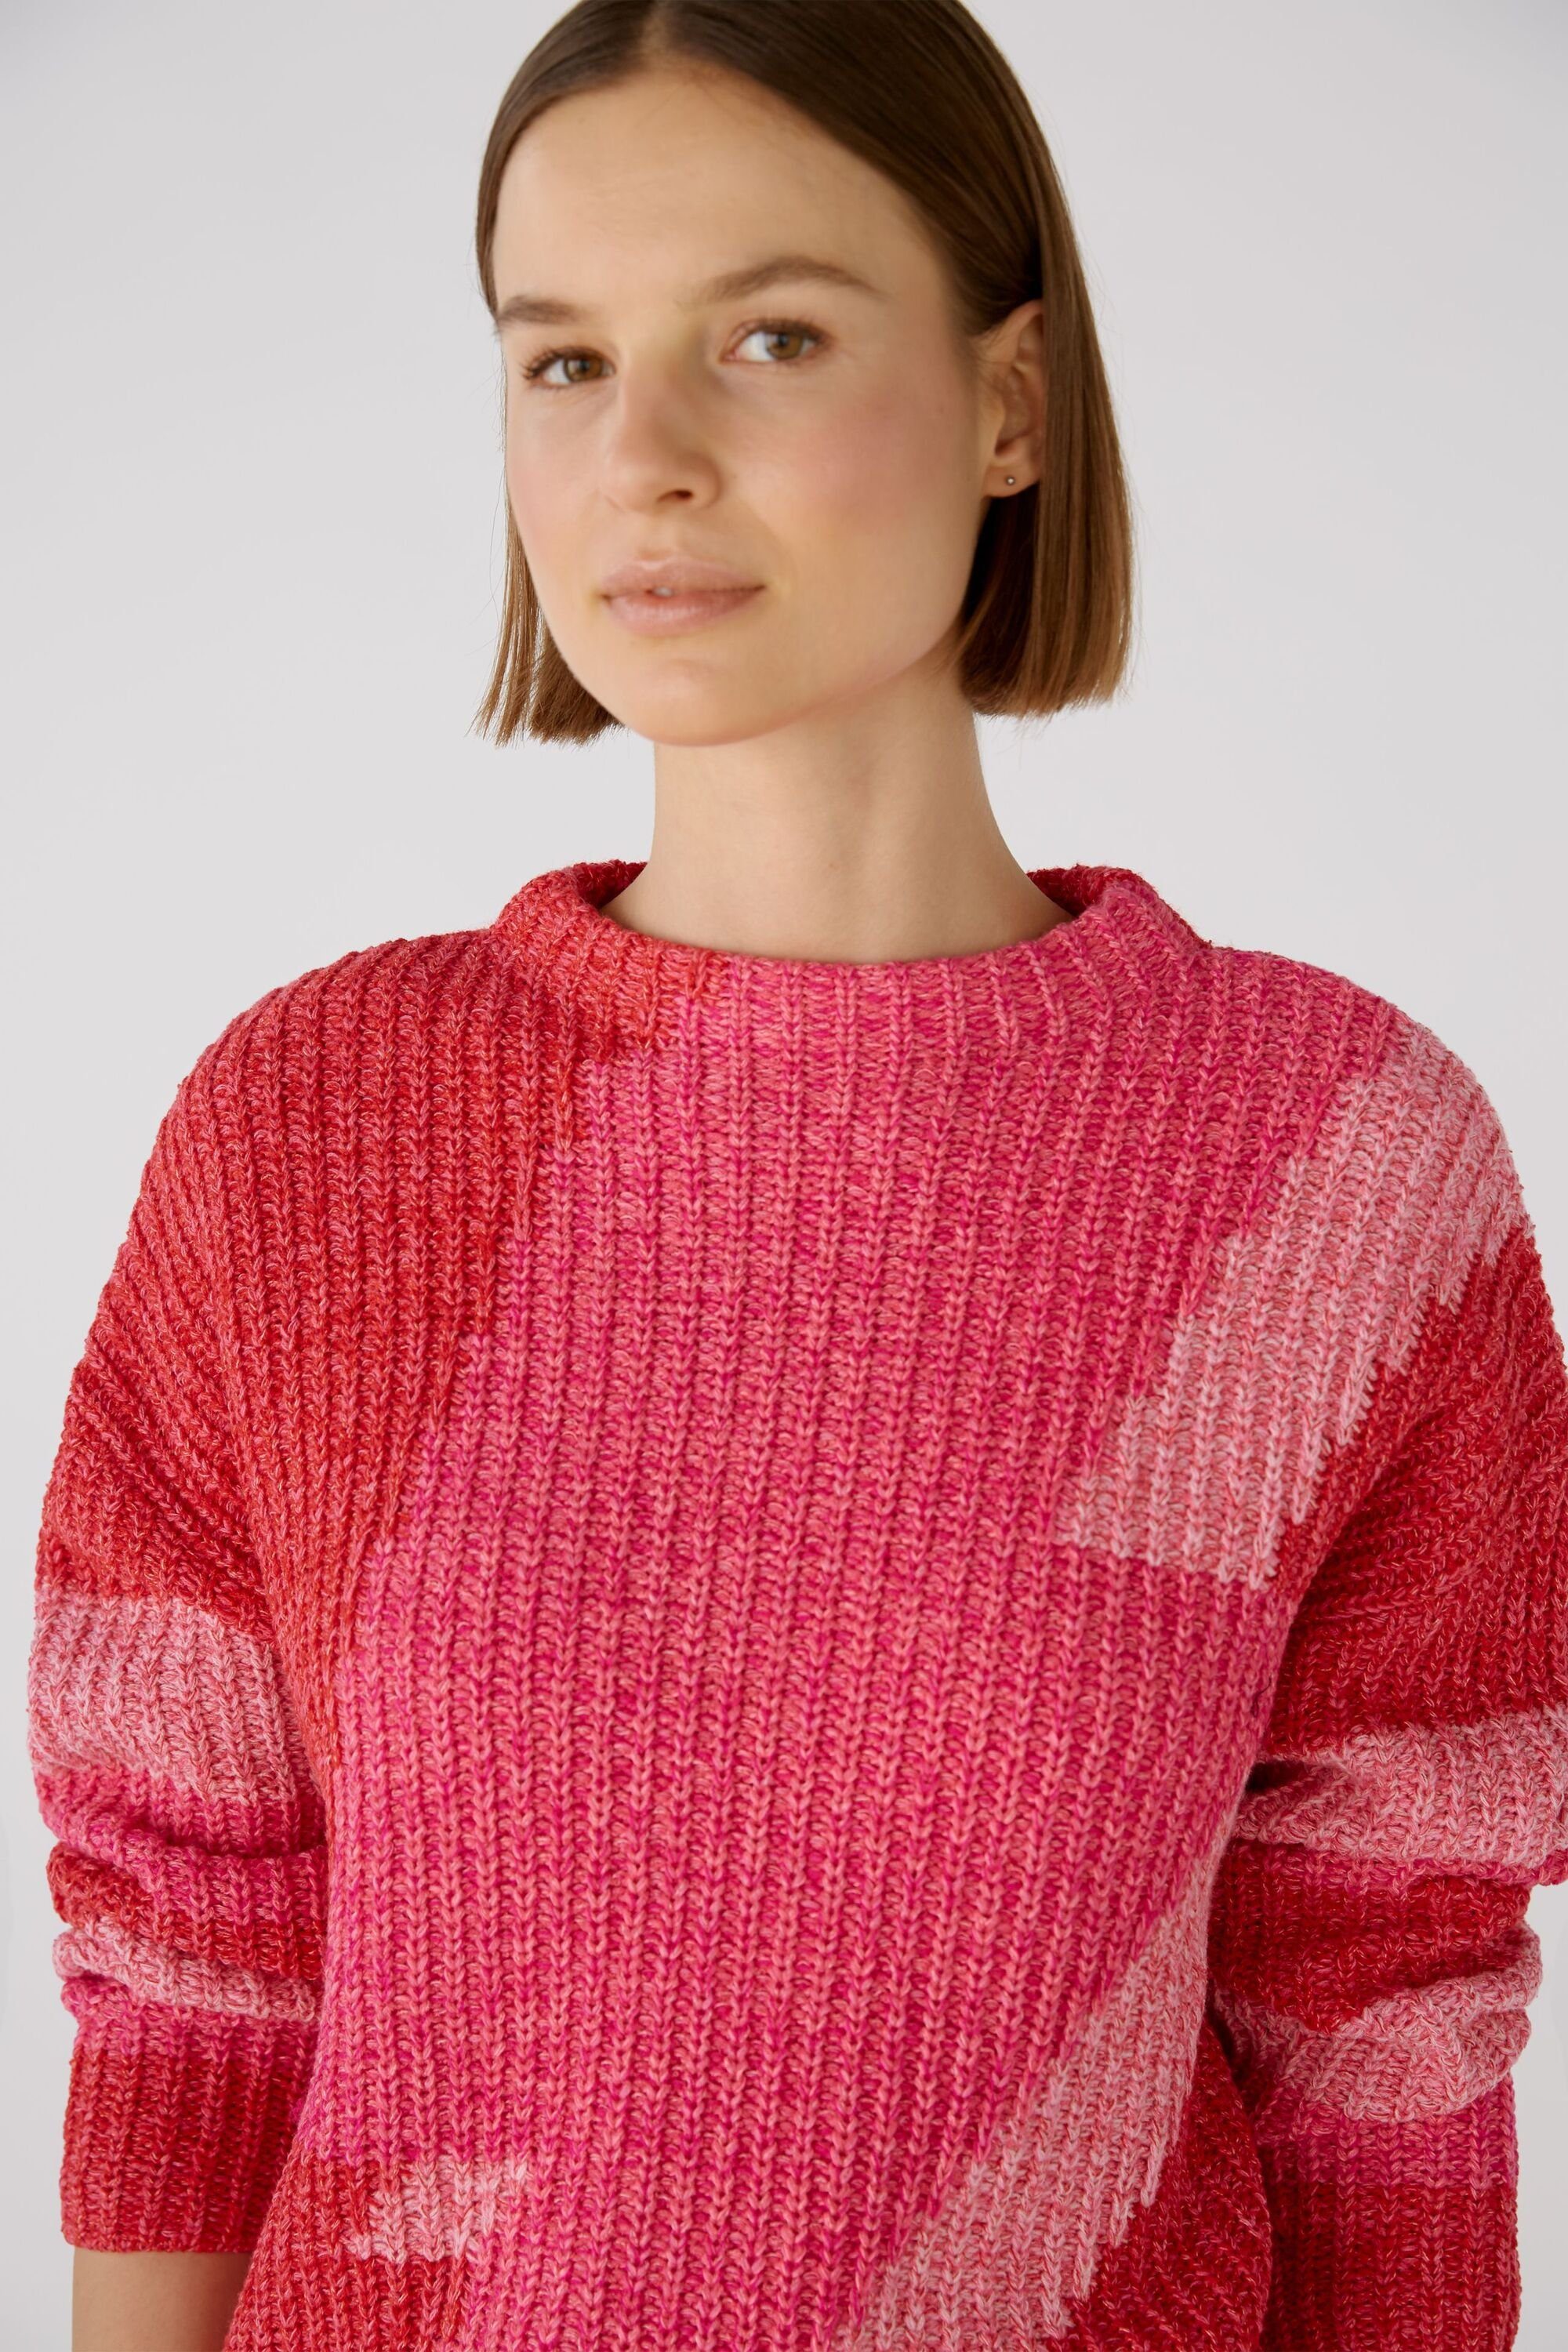 Oui Set Oui rot Strickpullover Baumwollmischung Pullover